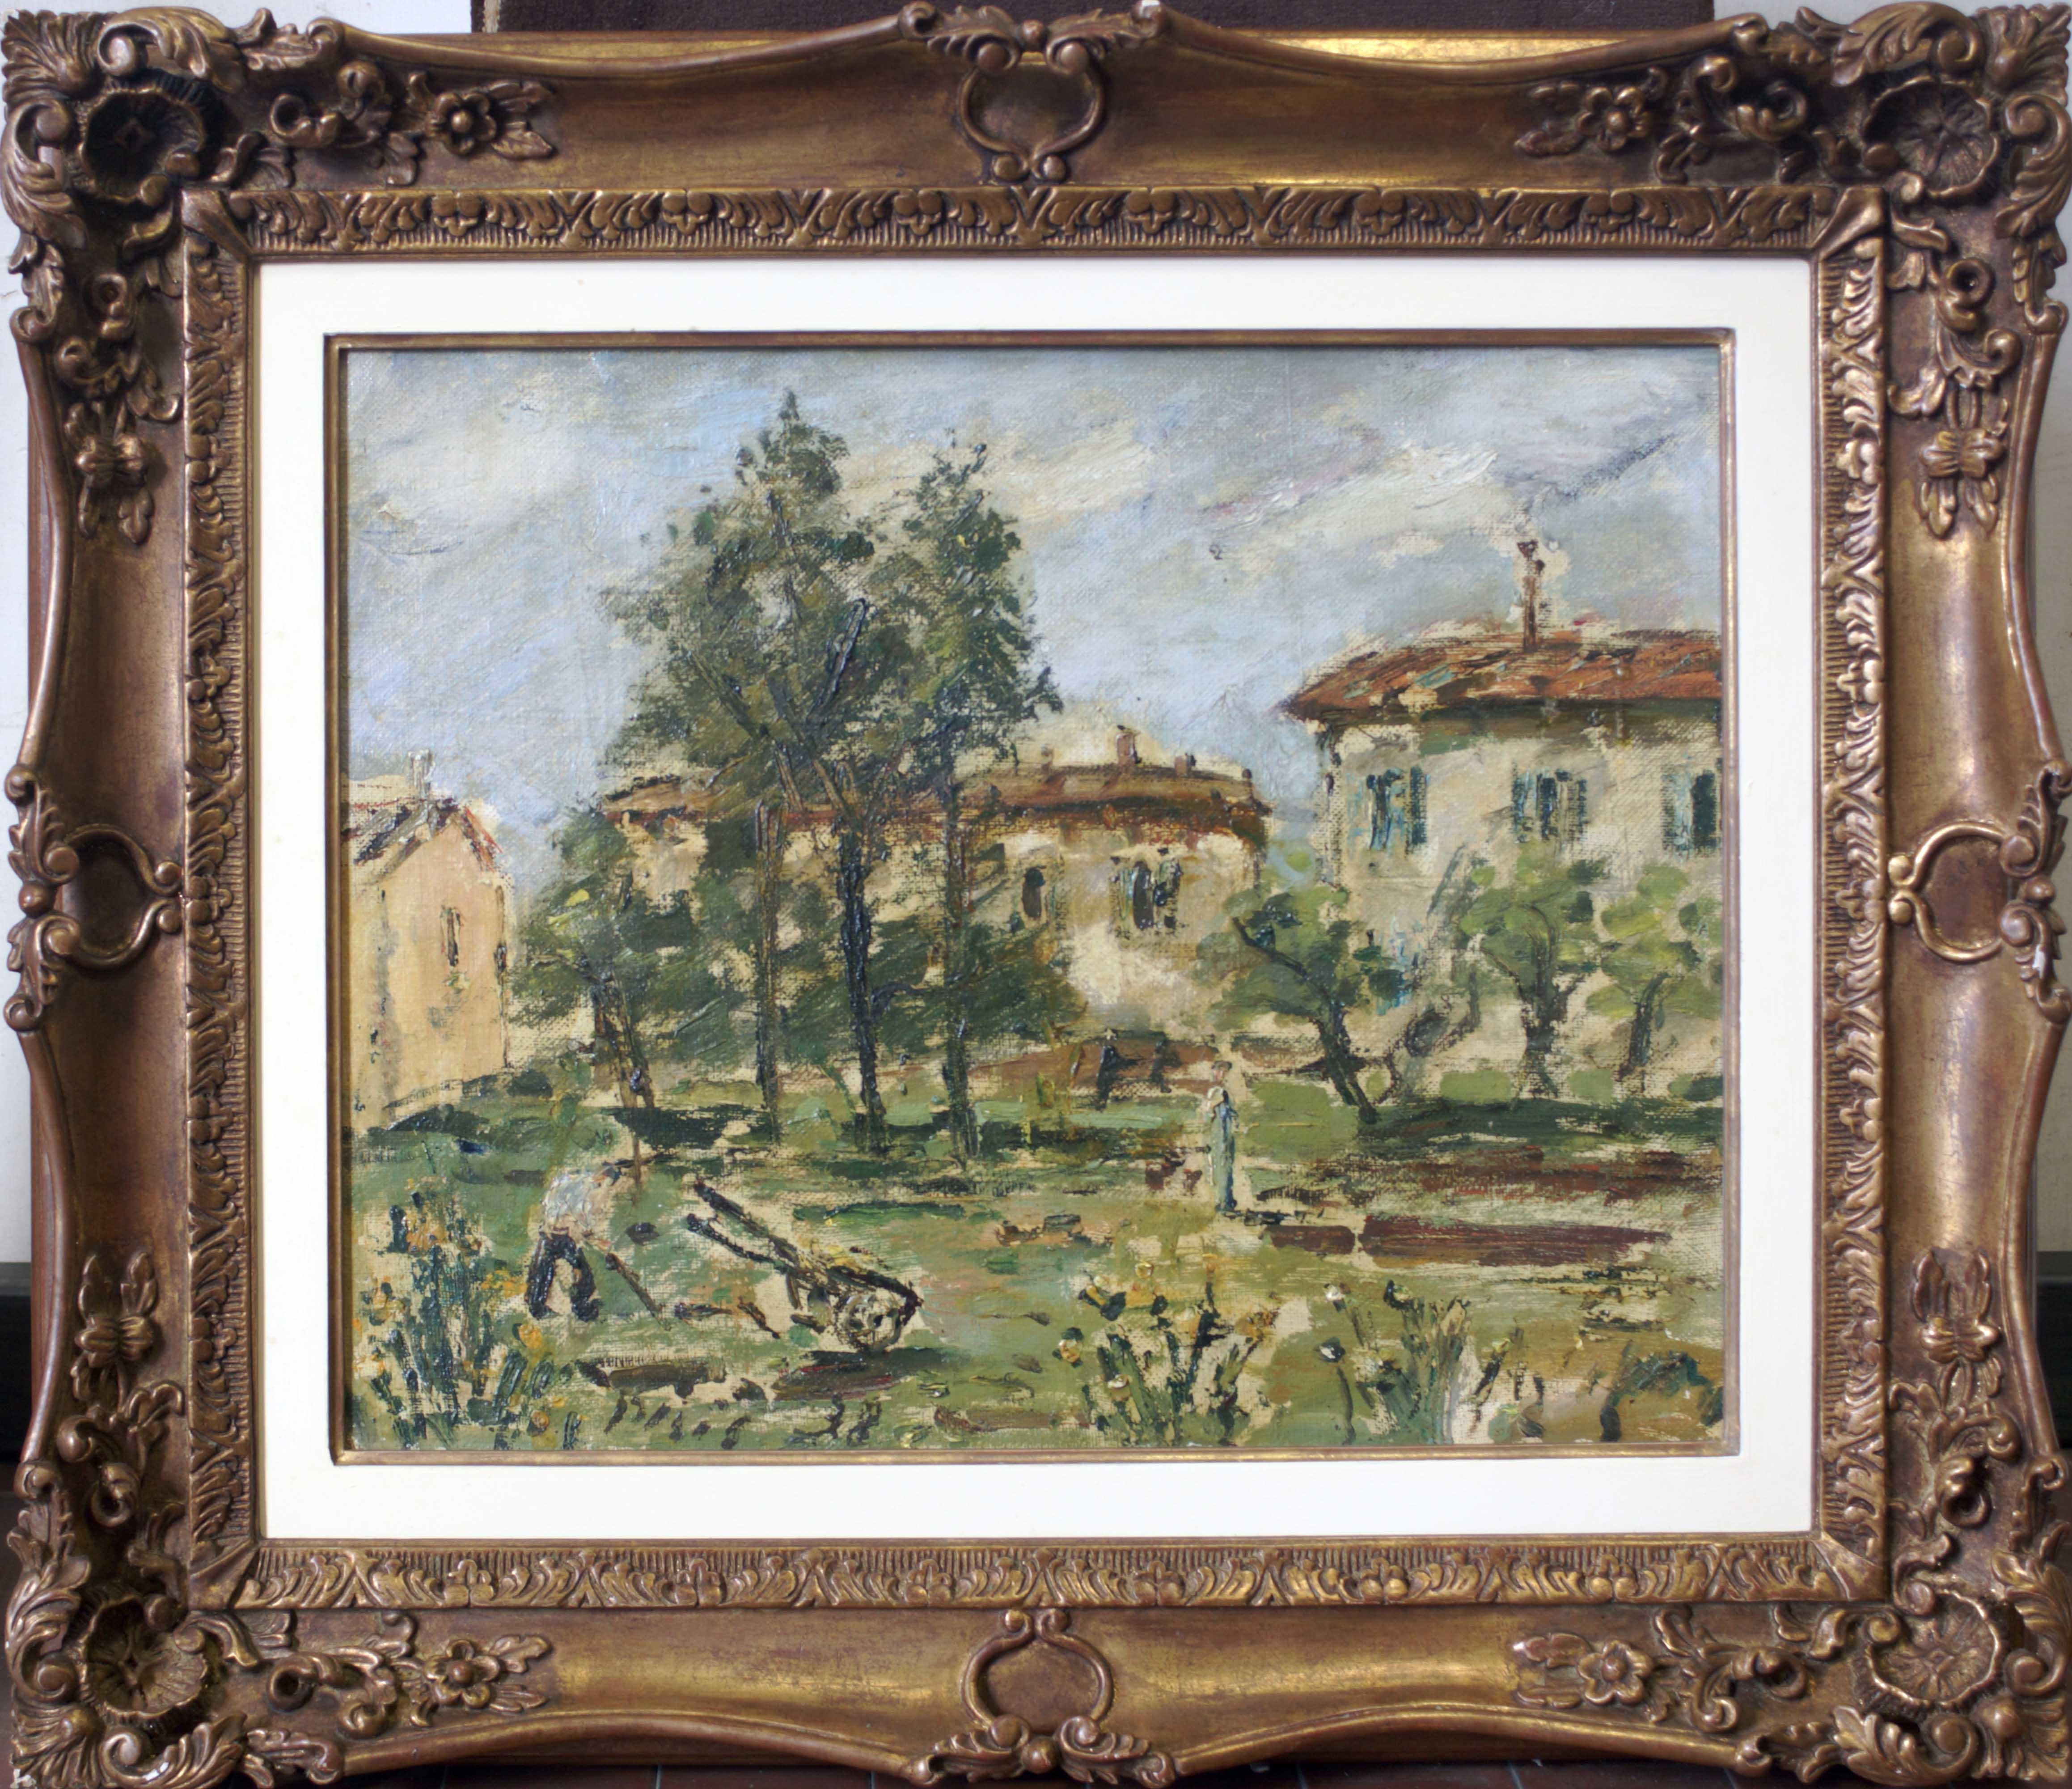 French Countryside - Oil on Canvas by F. De Pisis - 1938 - Painting by Filippo De Pisis